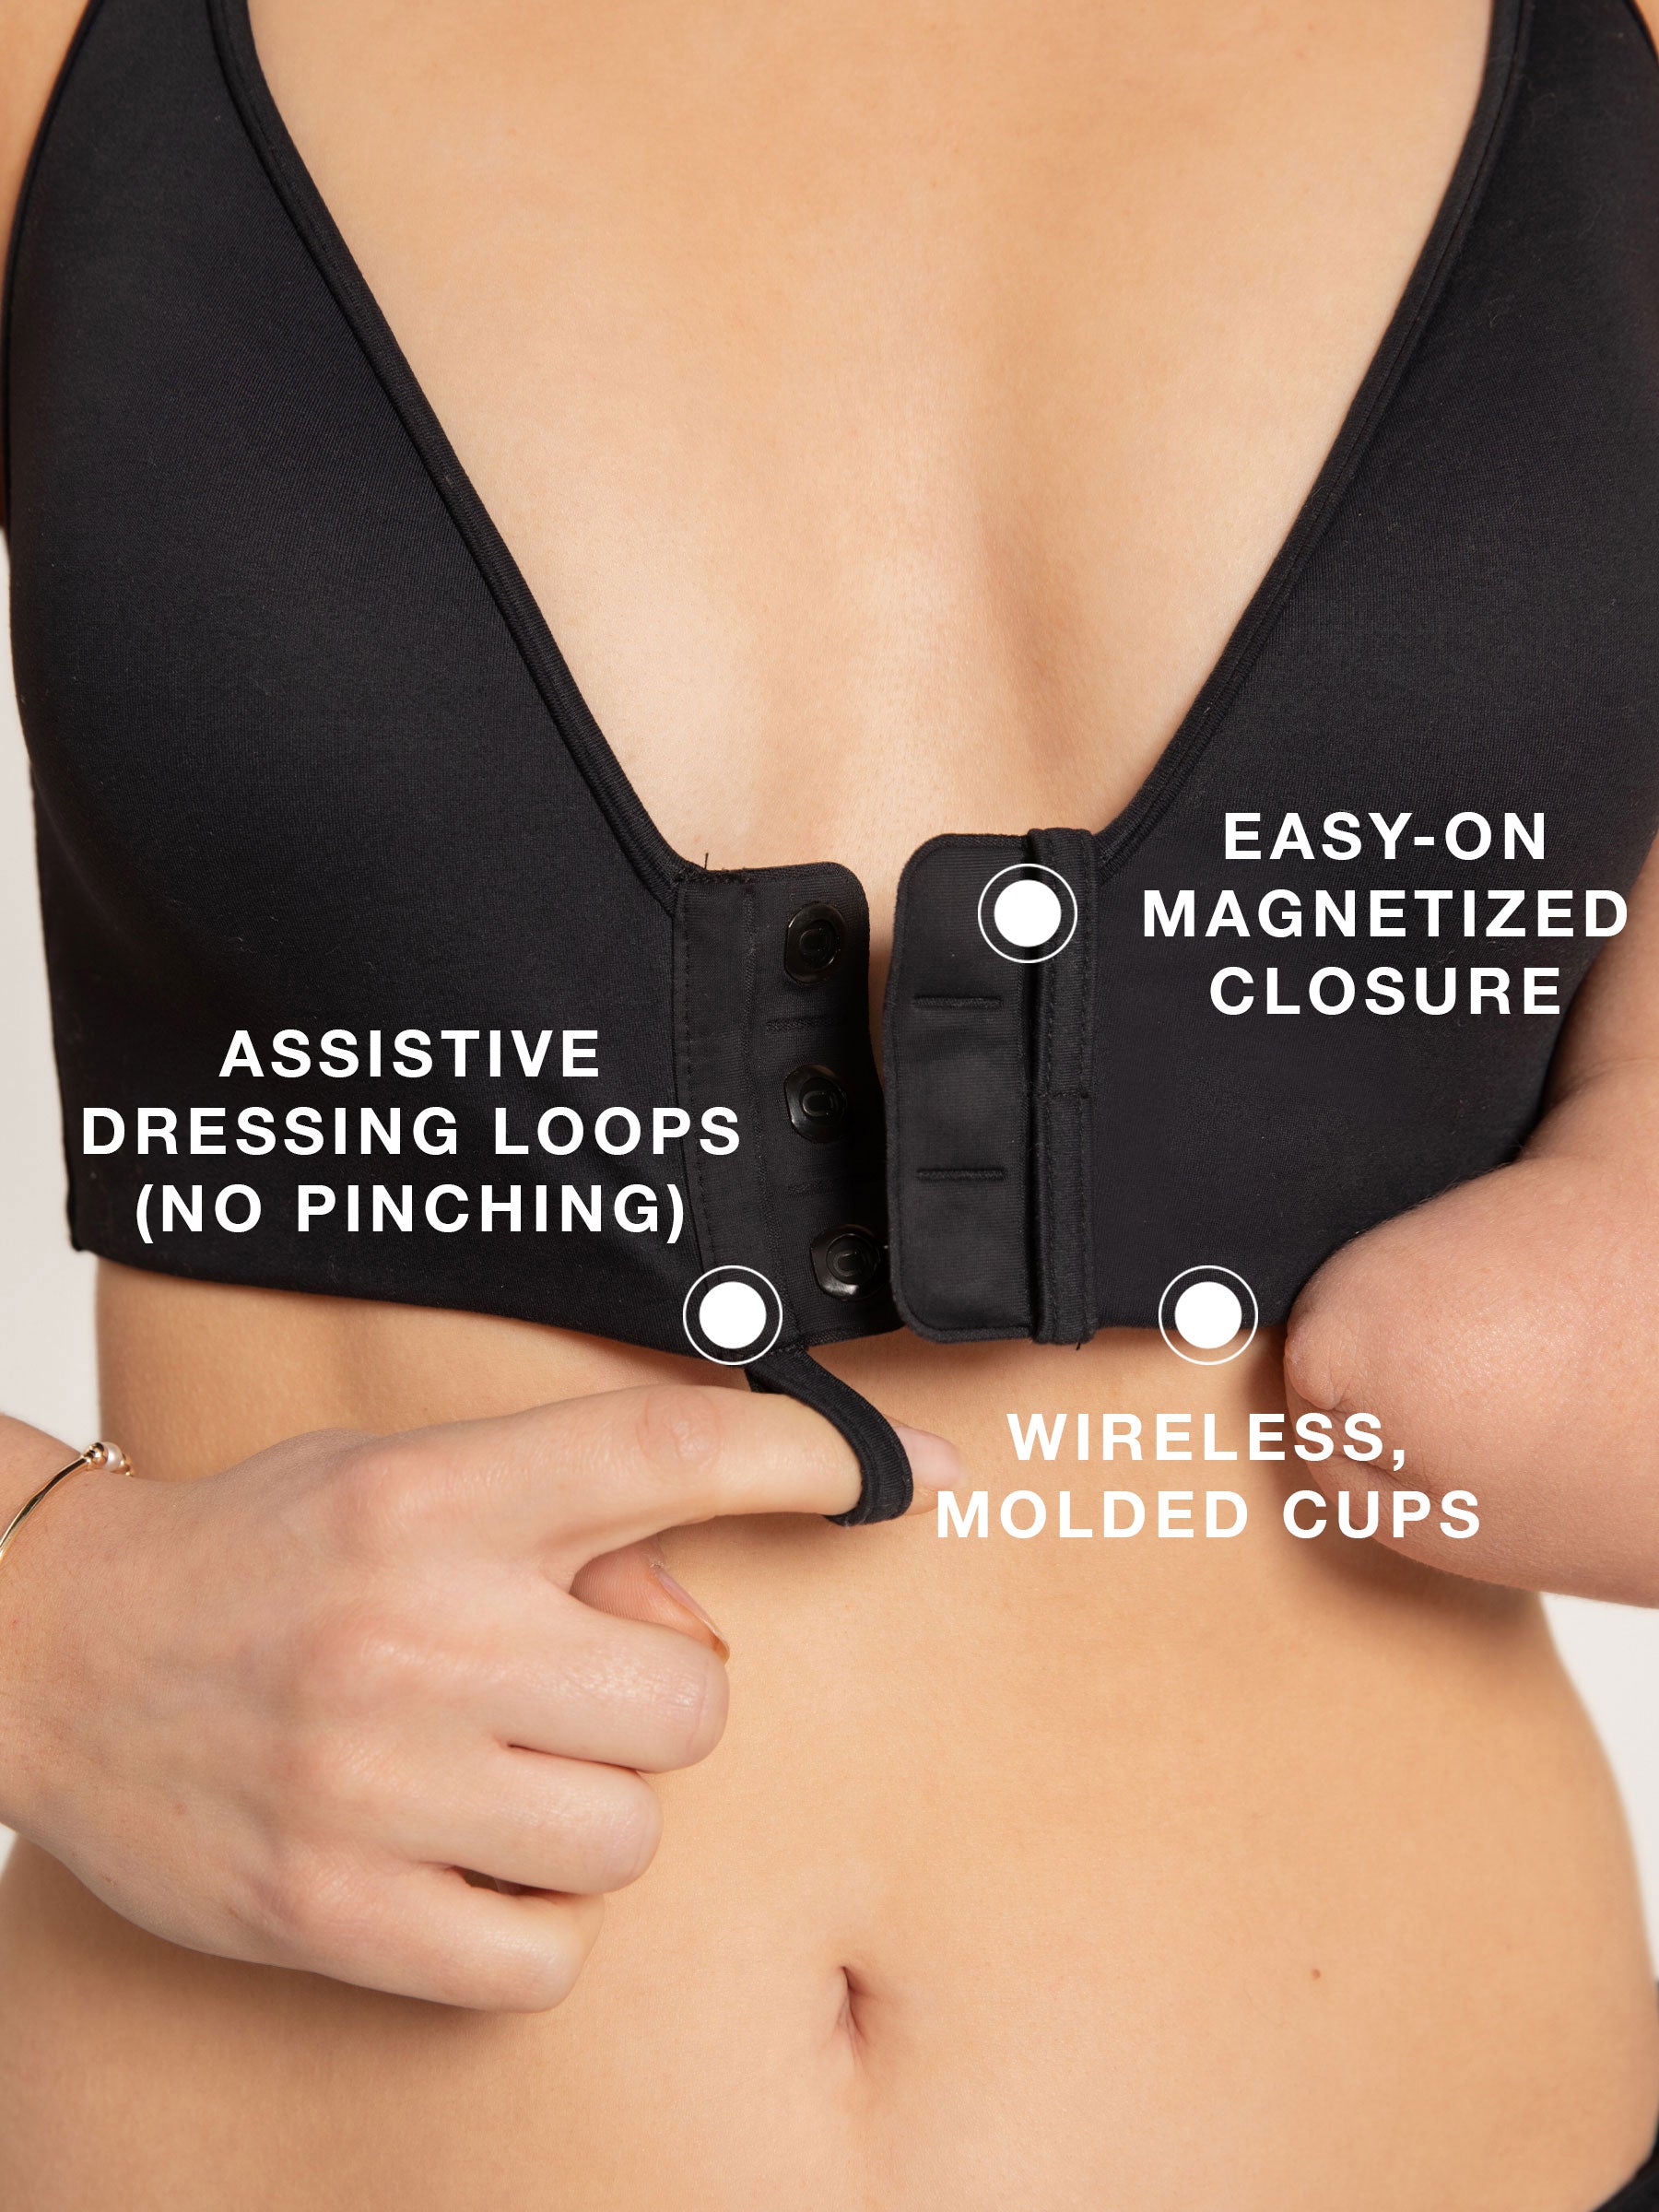 WIRELESS MOLDED CUPS. EASY-ON MAGNETIZED CLOSURE. ASSISTIVE DRESSING LOOPS (NO PINCHING)